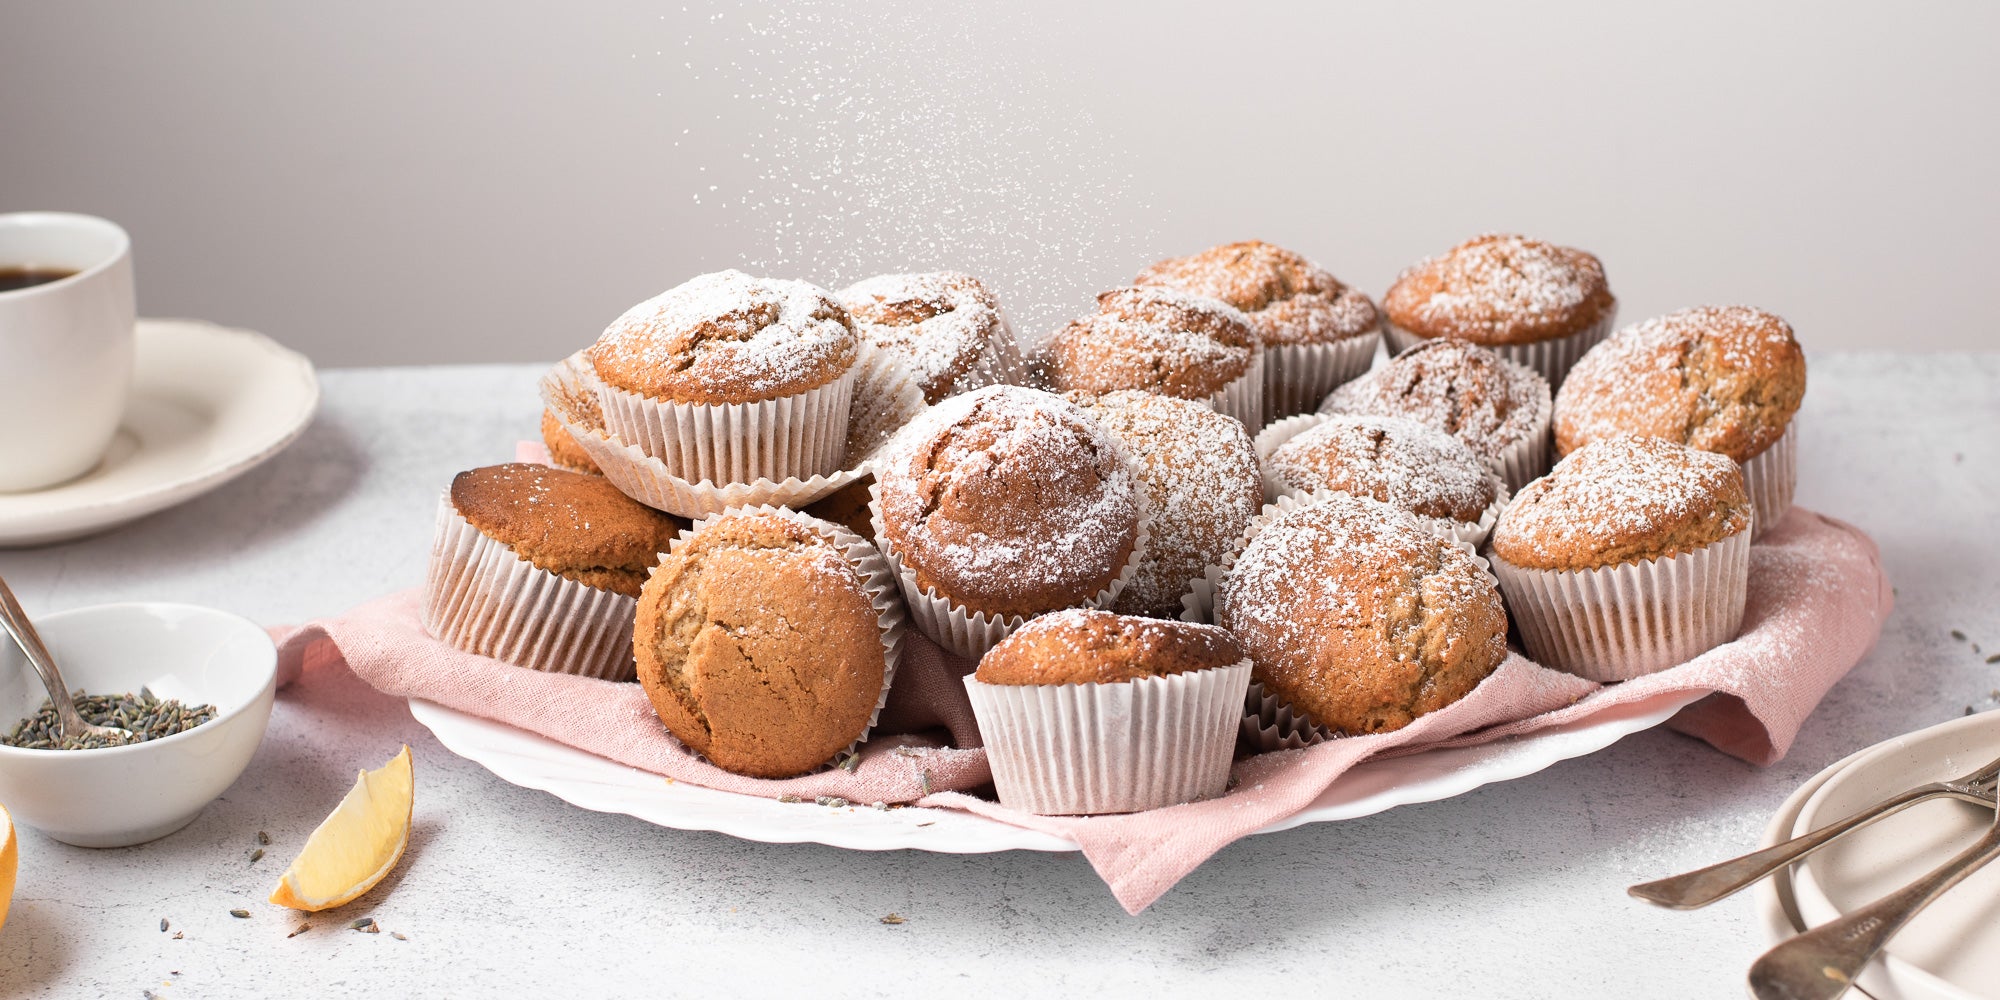 Pile of muffins coated with icing sugar